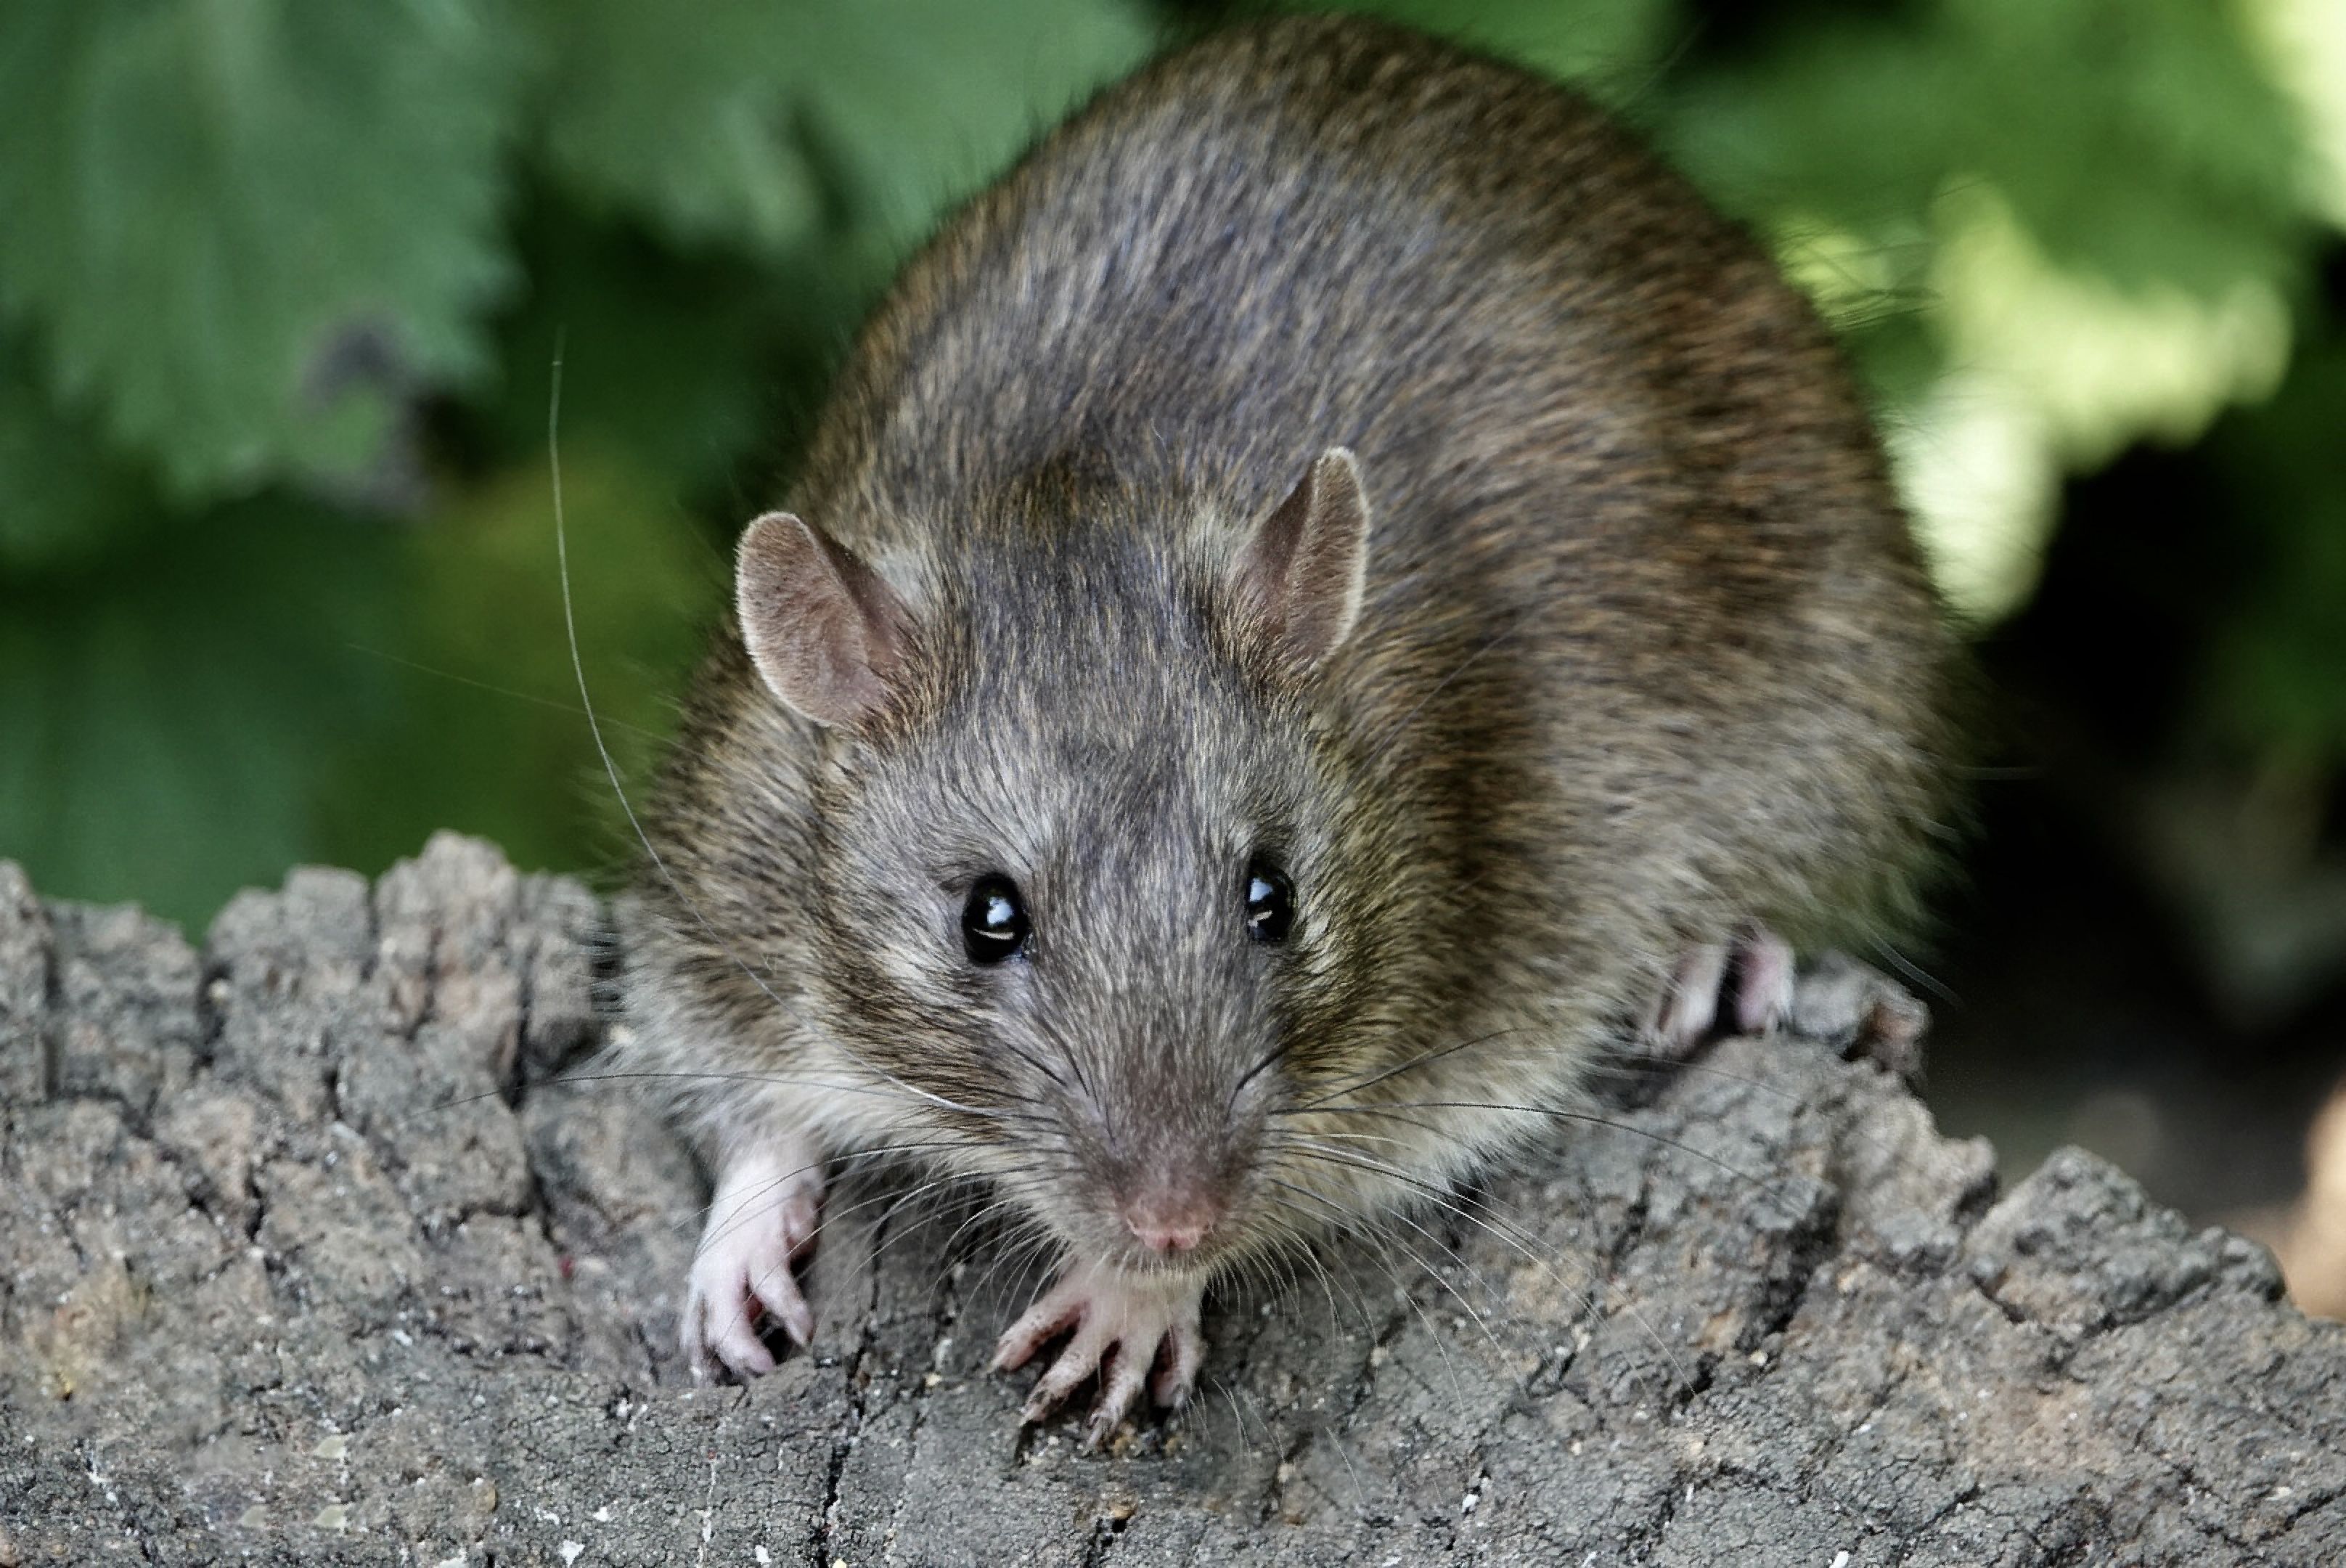 Rodent Control Melbourne